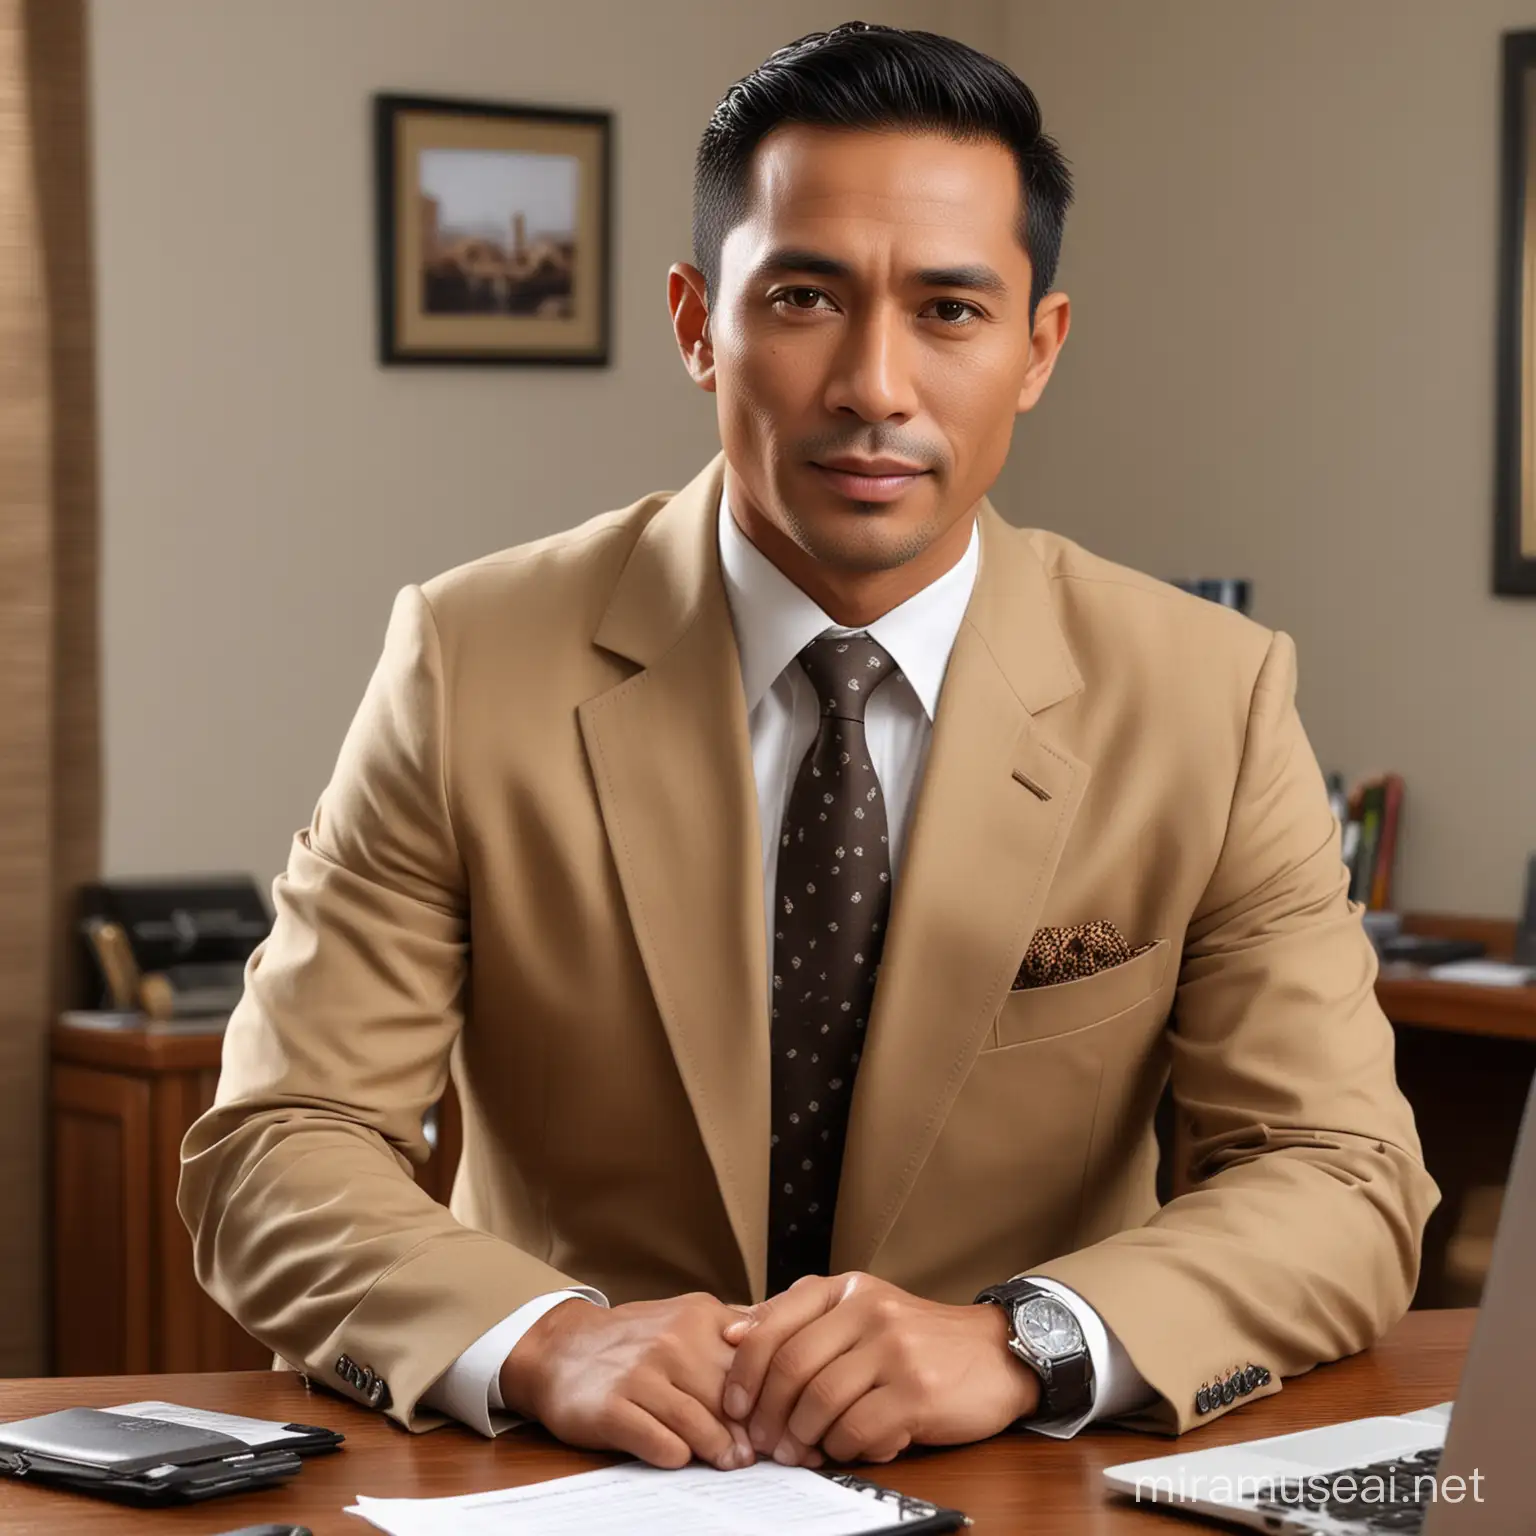 Handsome Indonesian Male Working in Office Room with Laptop on Table